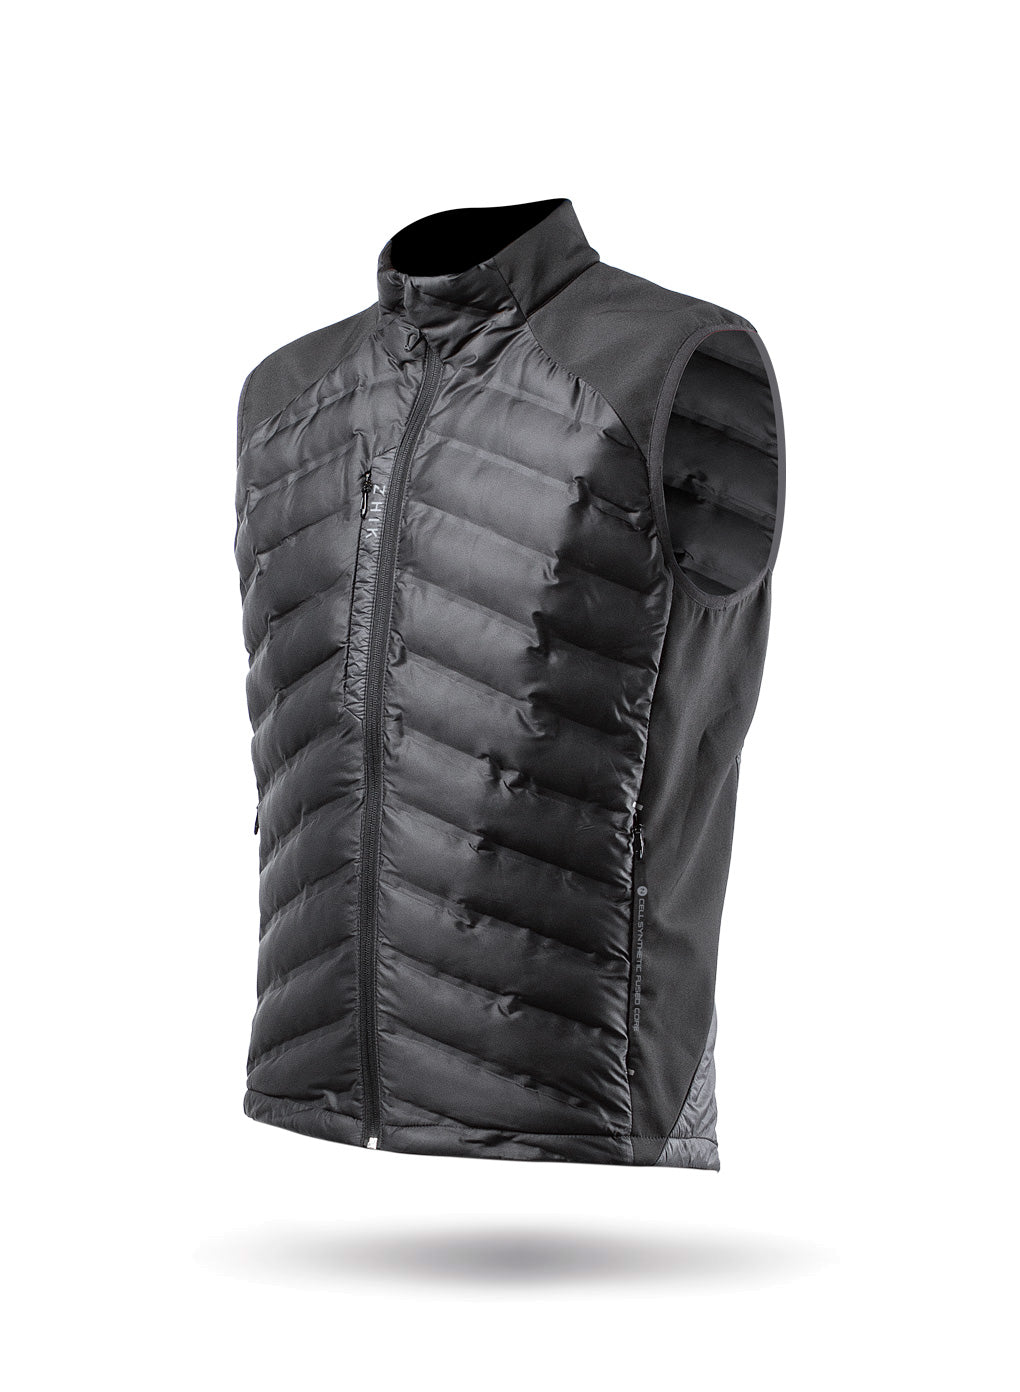 Mens Black Cell Insulated Vest